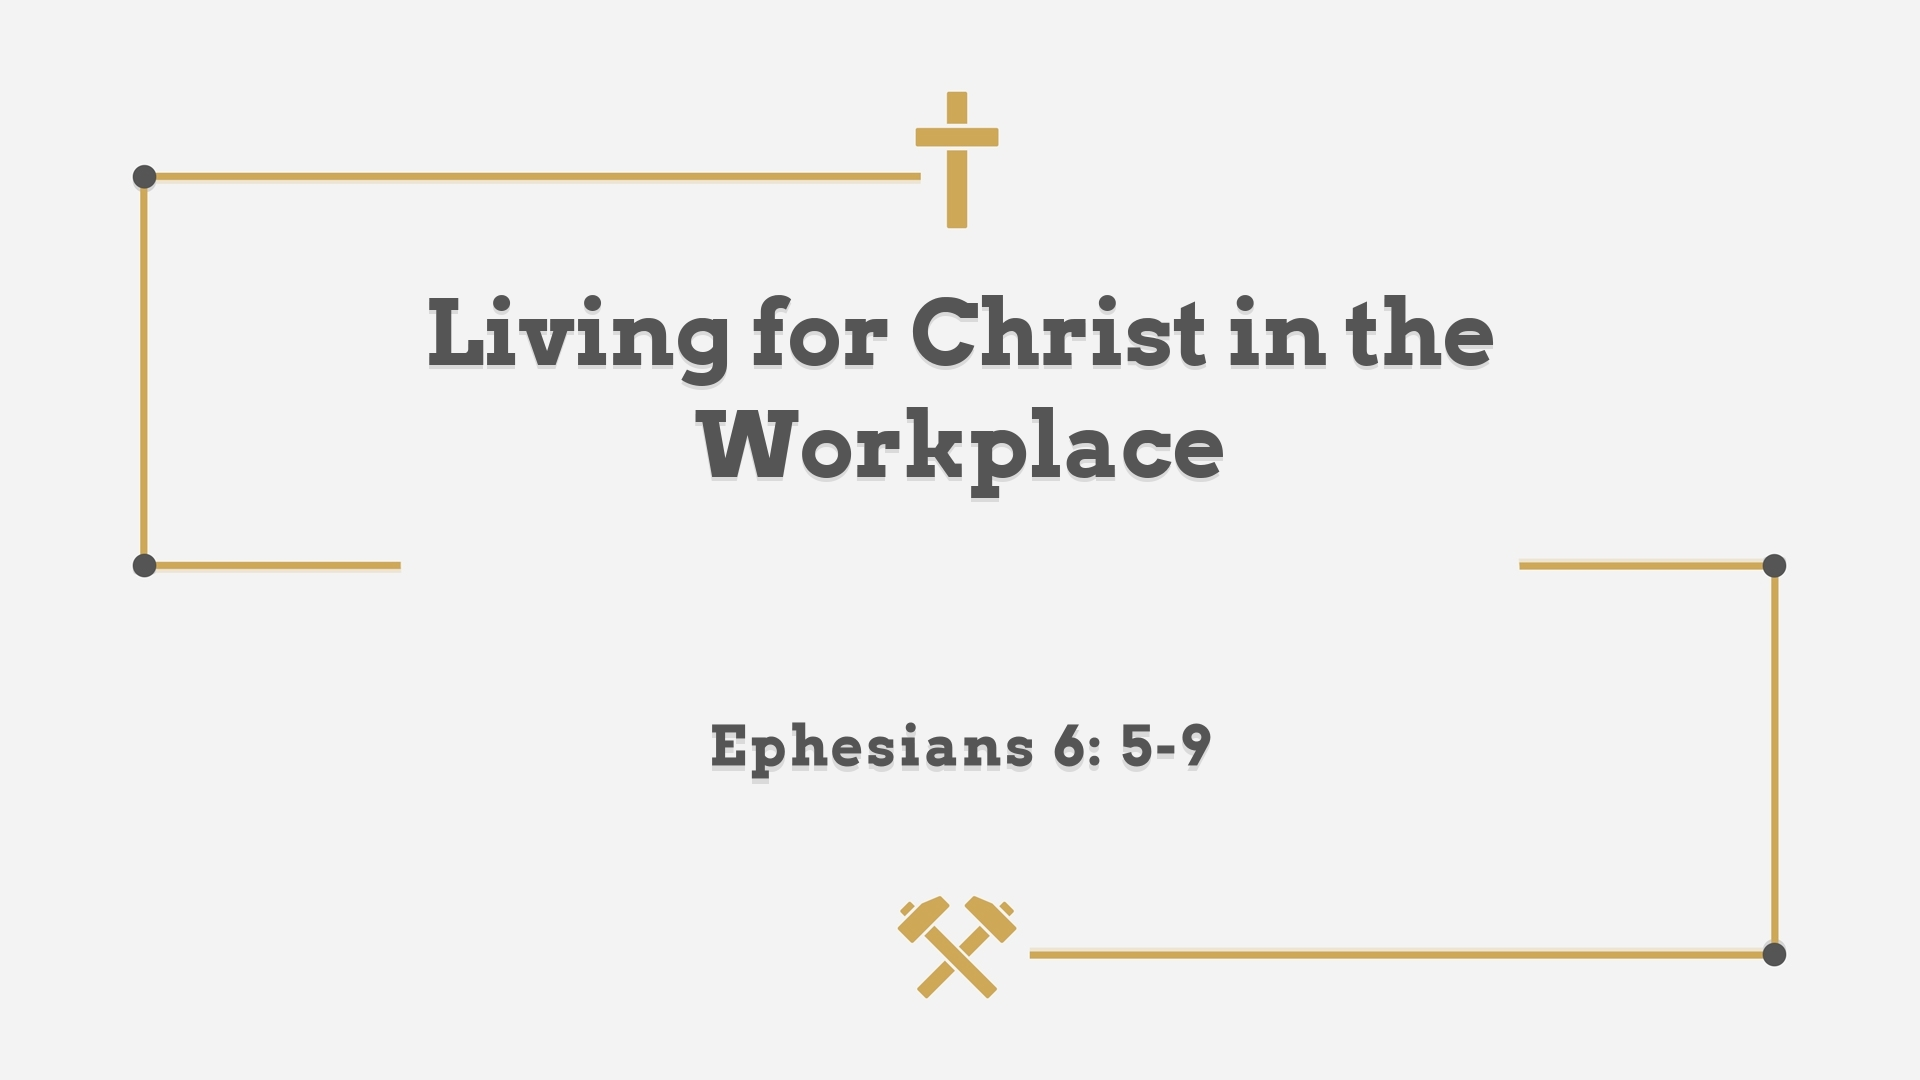 Aug 22, 2021 - Living for Christ in the Workplace  (Video) - Ephesians 6: 5-9